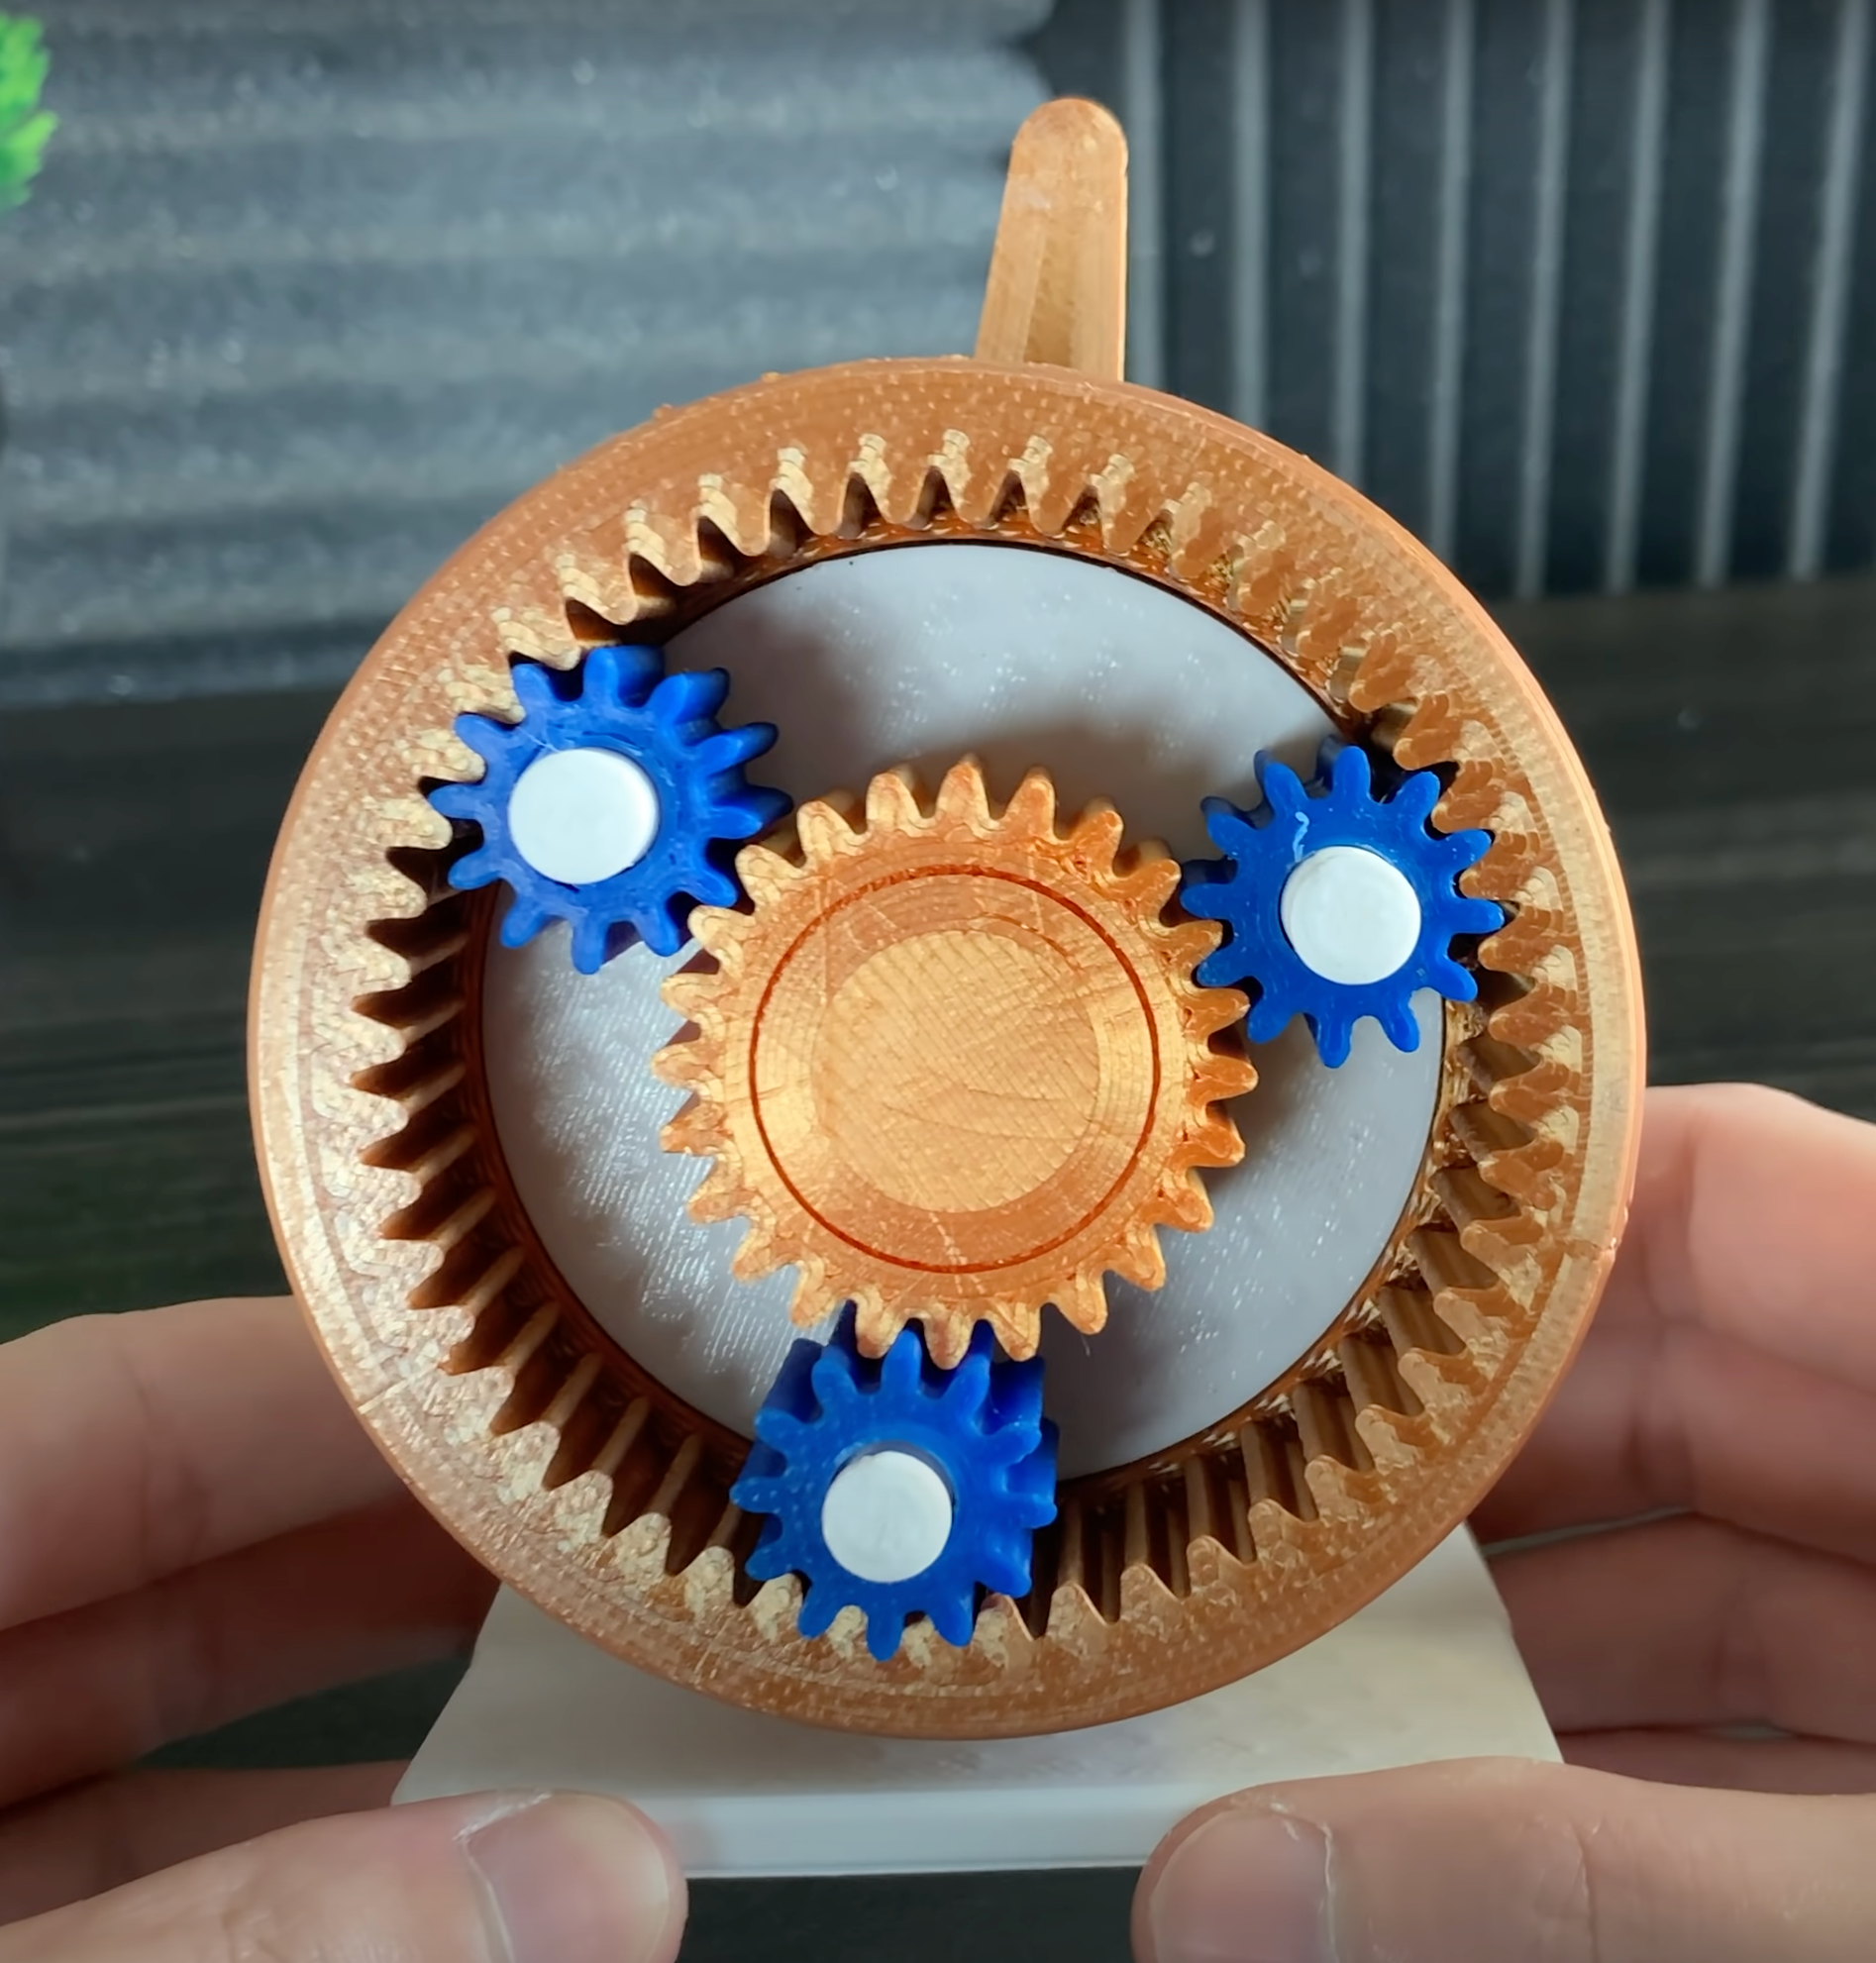 Planetary Gearbox – 3D Printer Academy